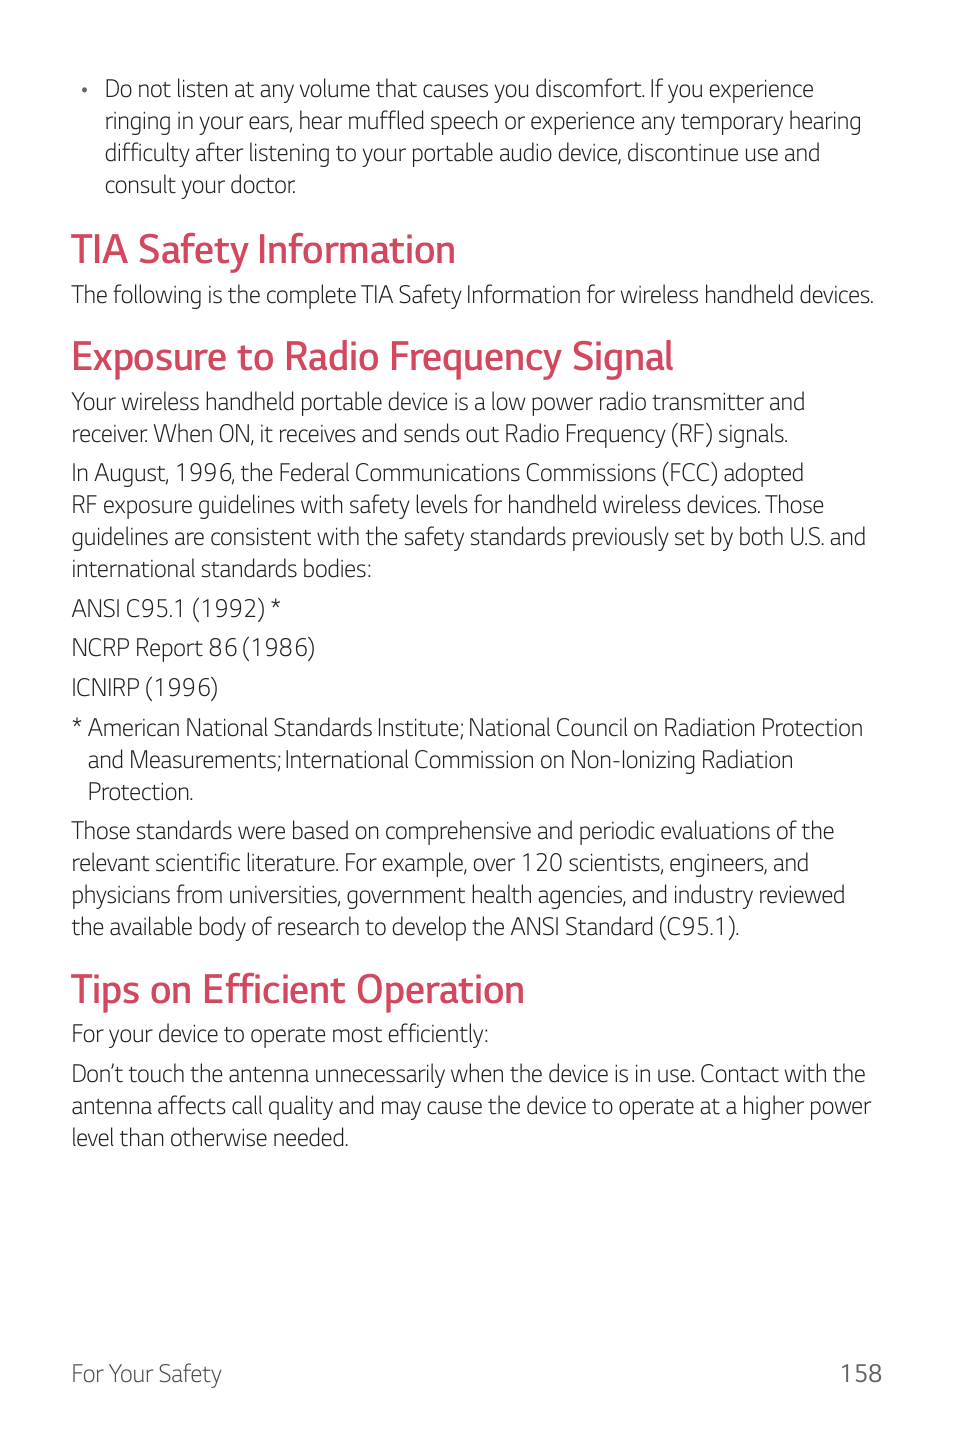 Tia safety information, Exposure to radio frequency signal, Tips on efficient operation | LG G6 H872 User Manual | Page 159 / 183